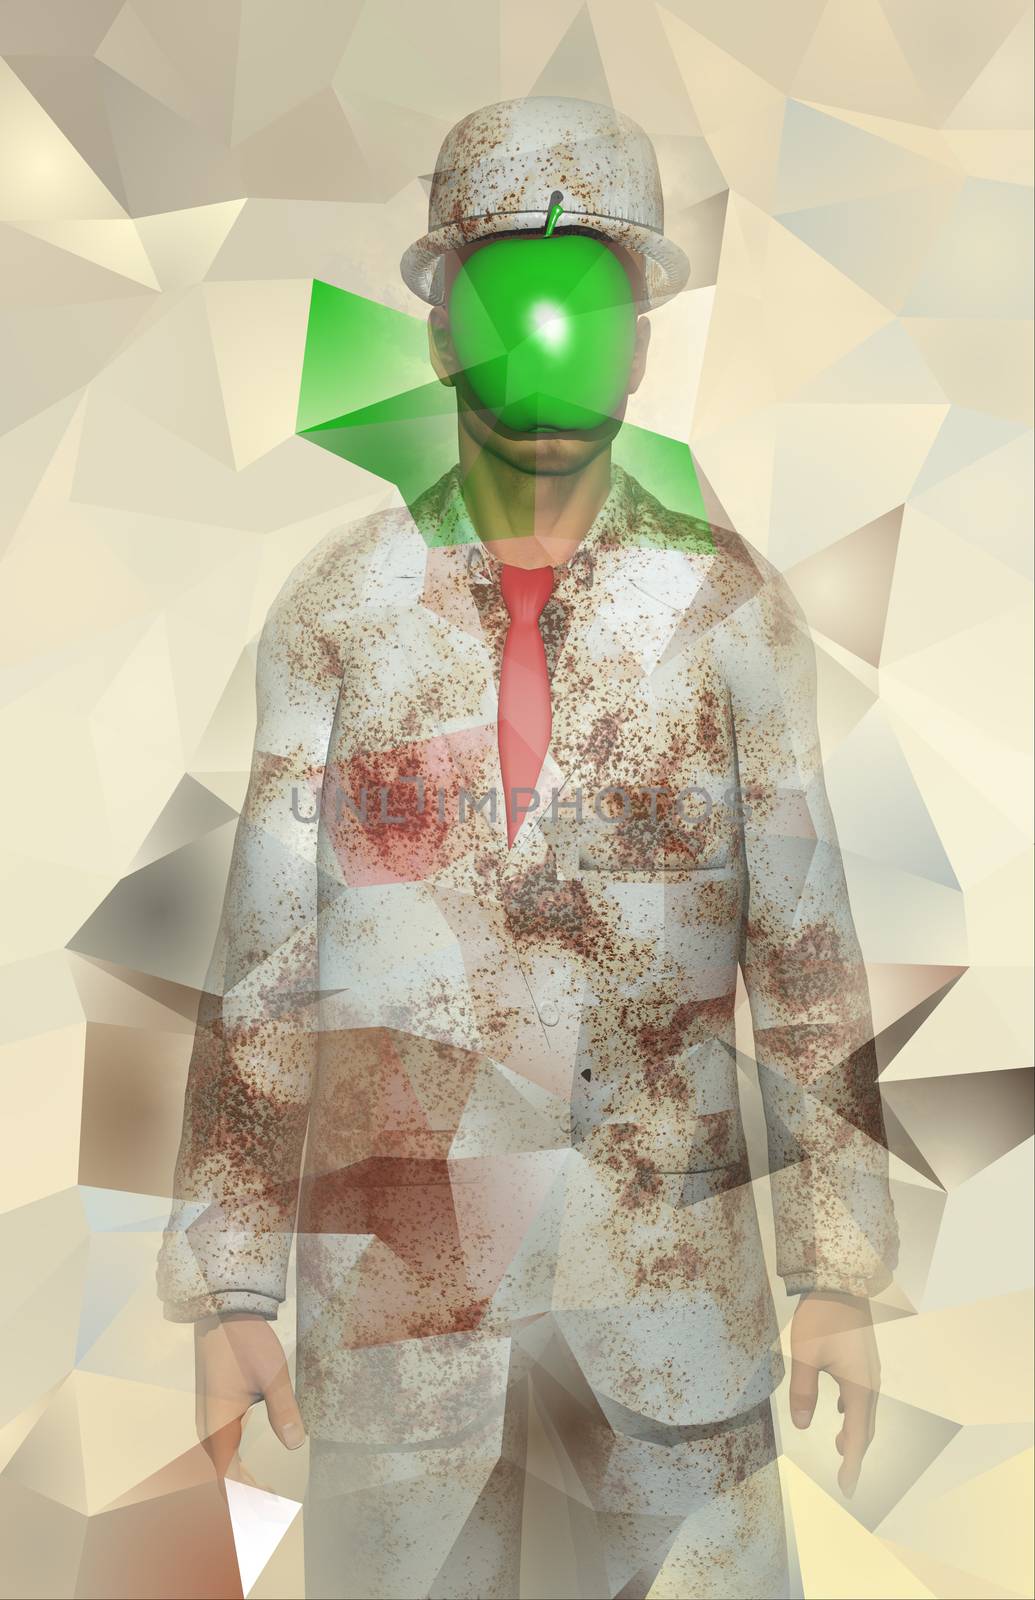 Surreal digital art. Man in white corroded suit with green apple instead of face. Rene Magritte style. 3D rendering.